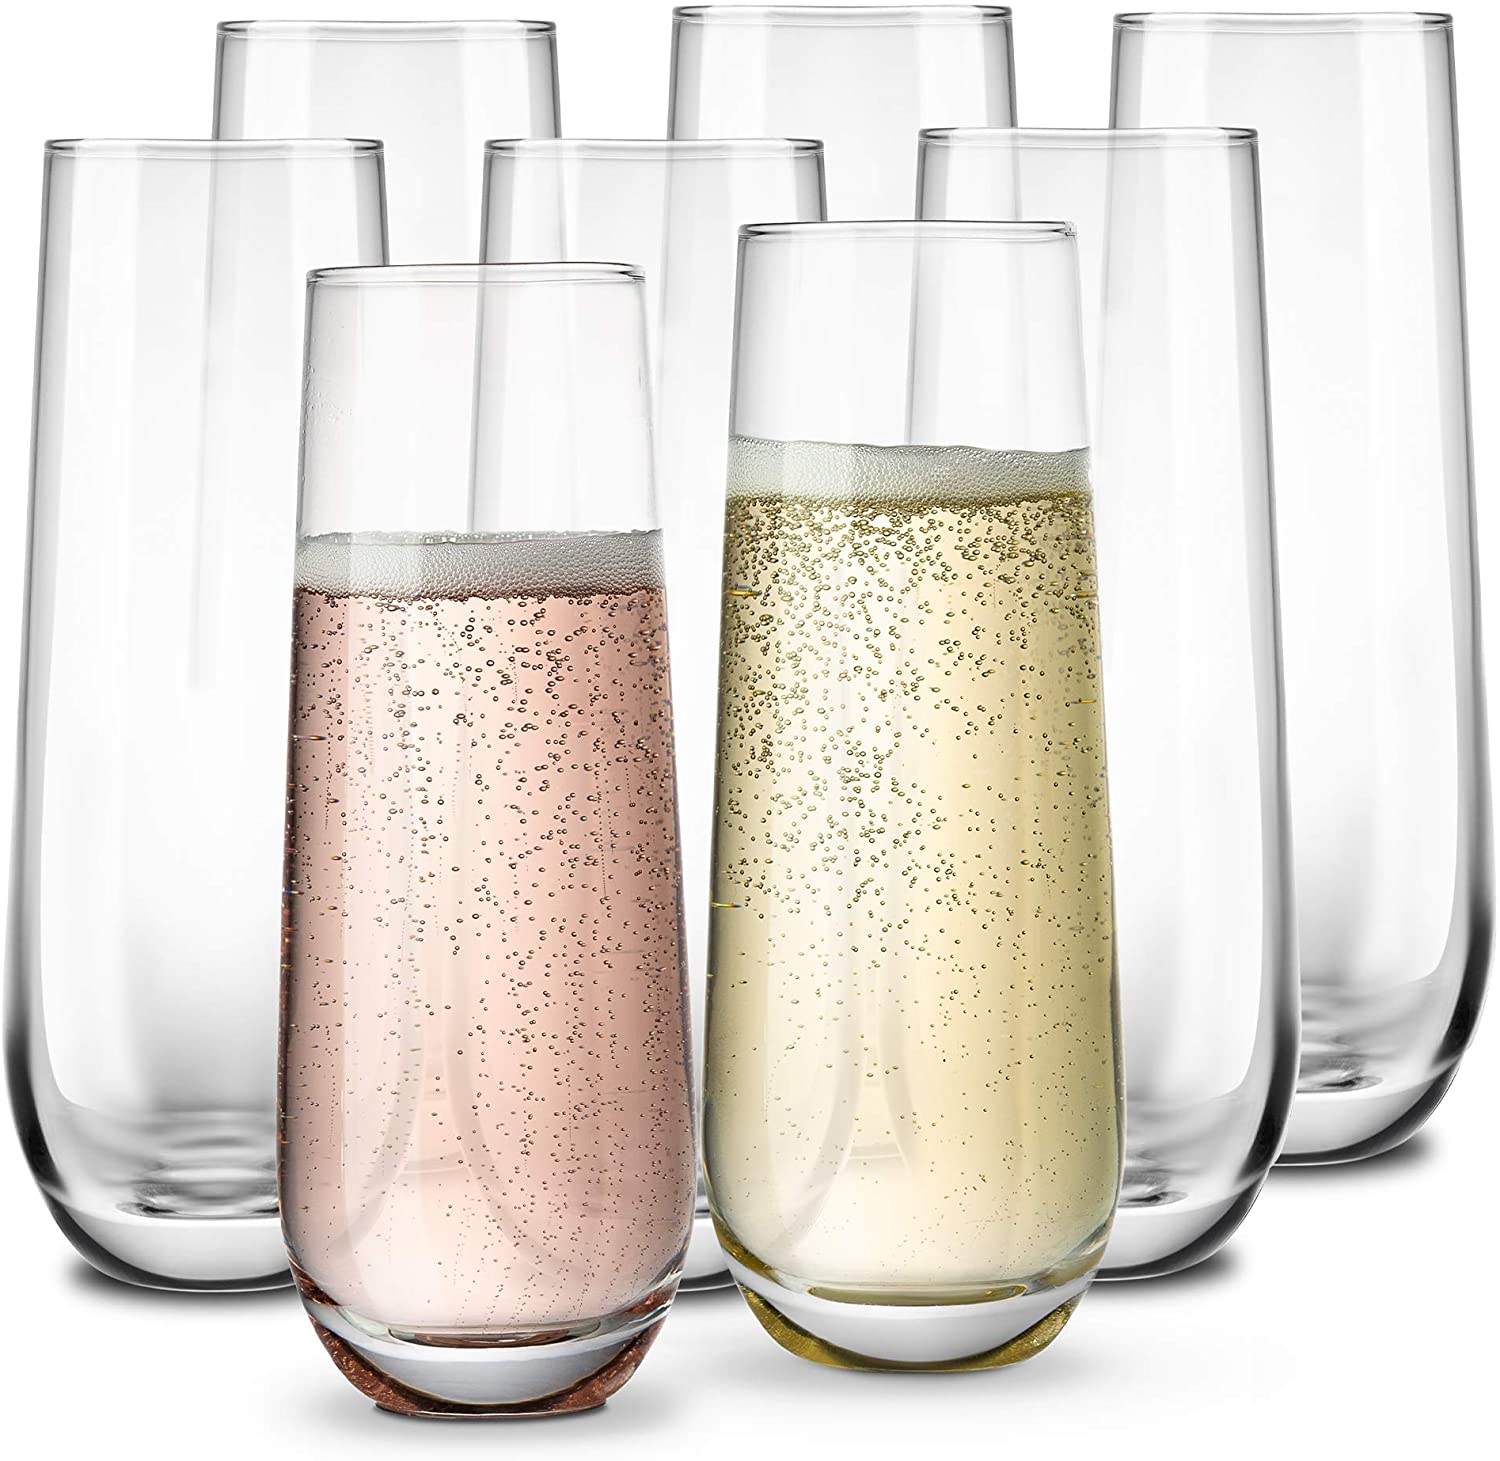 Stemless Champagne Flute Glasses All-Purpose Wine Drinking Glassware Beverage Cups for Water, Juice, Beer, Liquor, Whisk